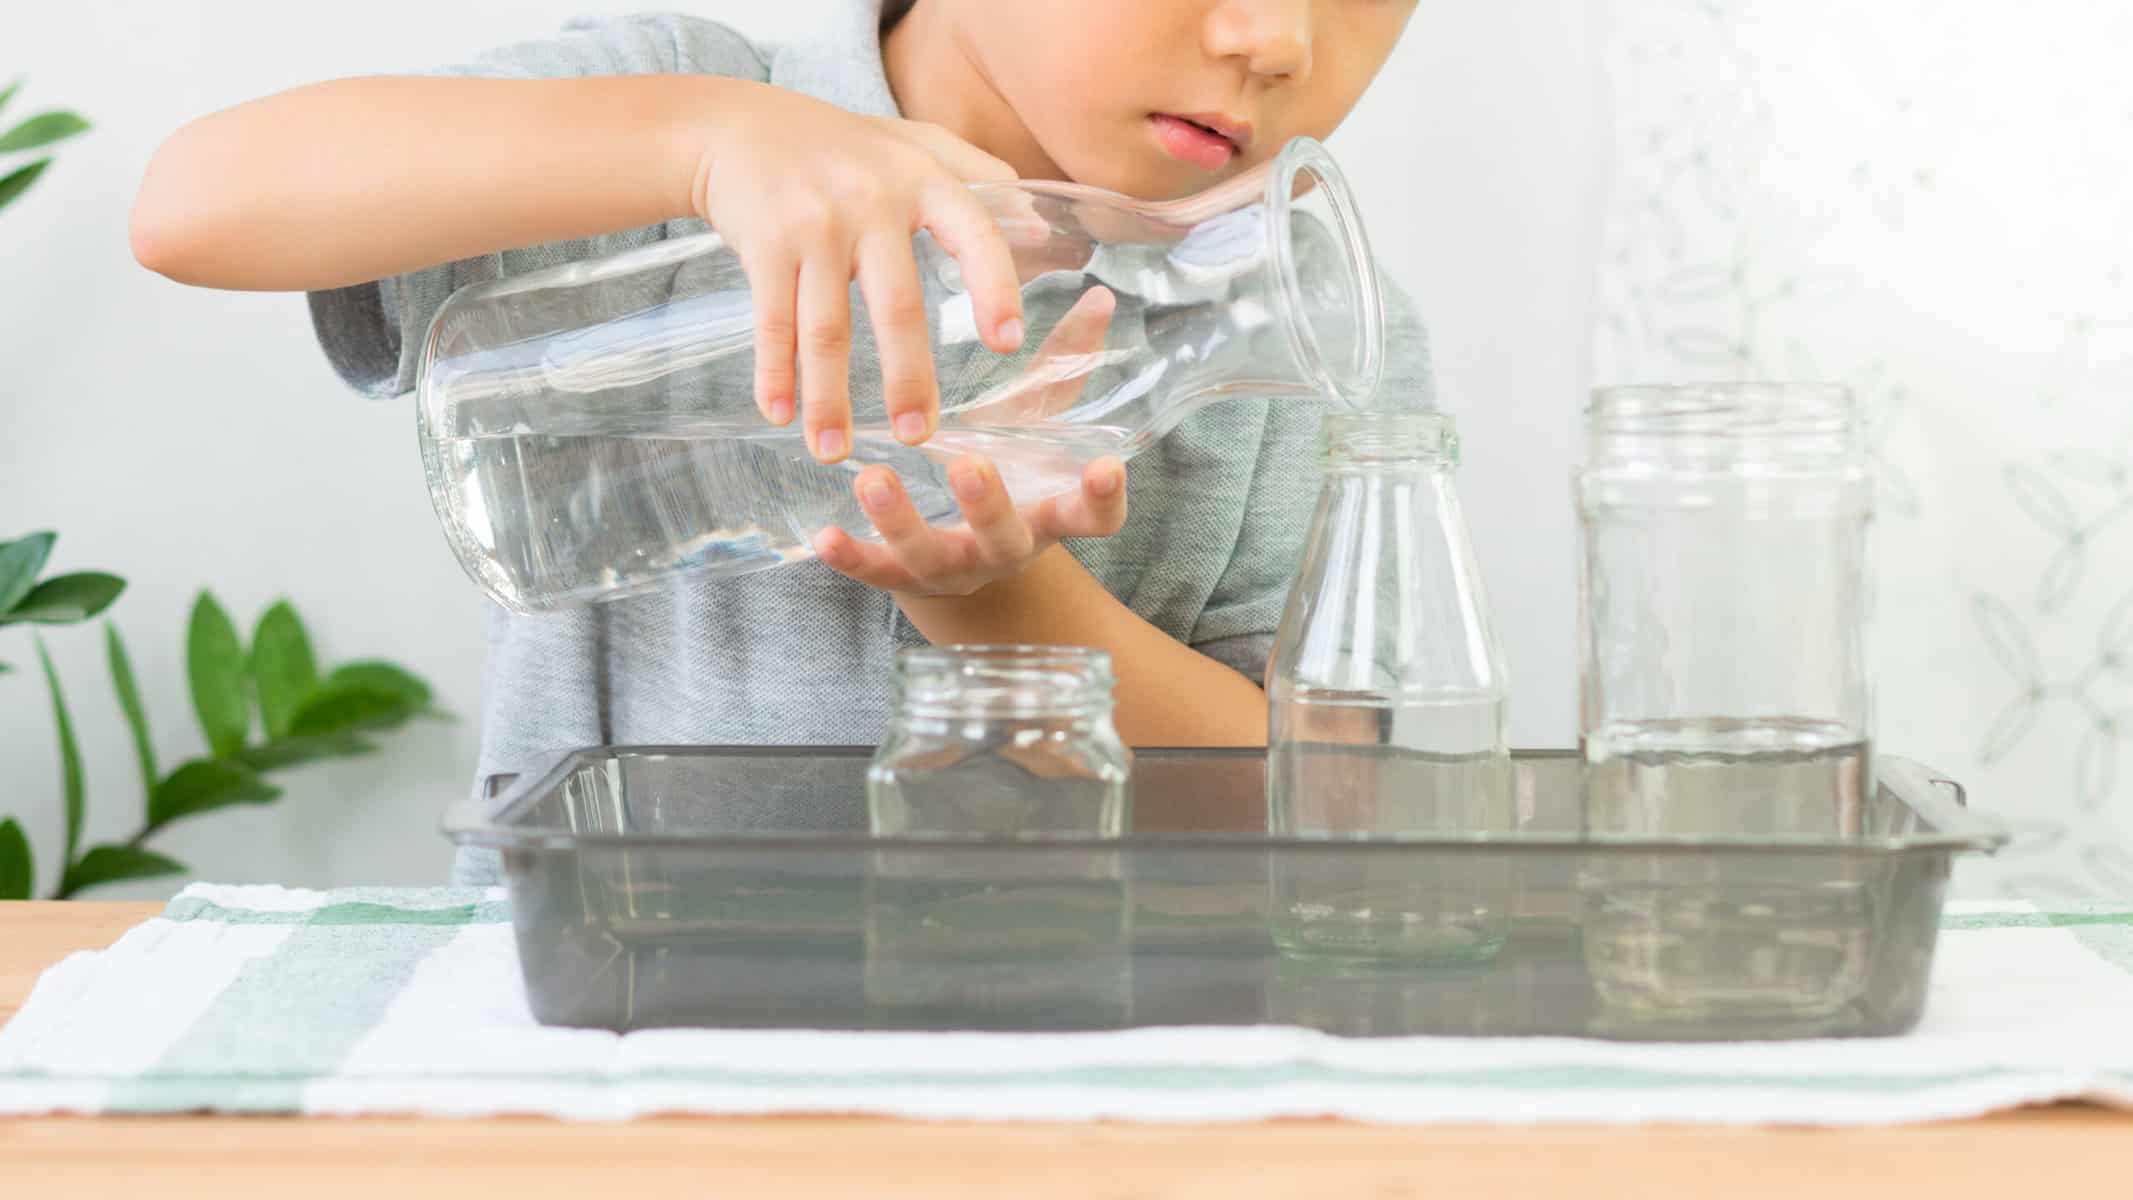 A child exploring the concept of conservation during their Montessori homeschooling activities